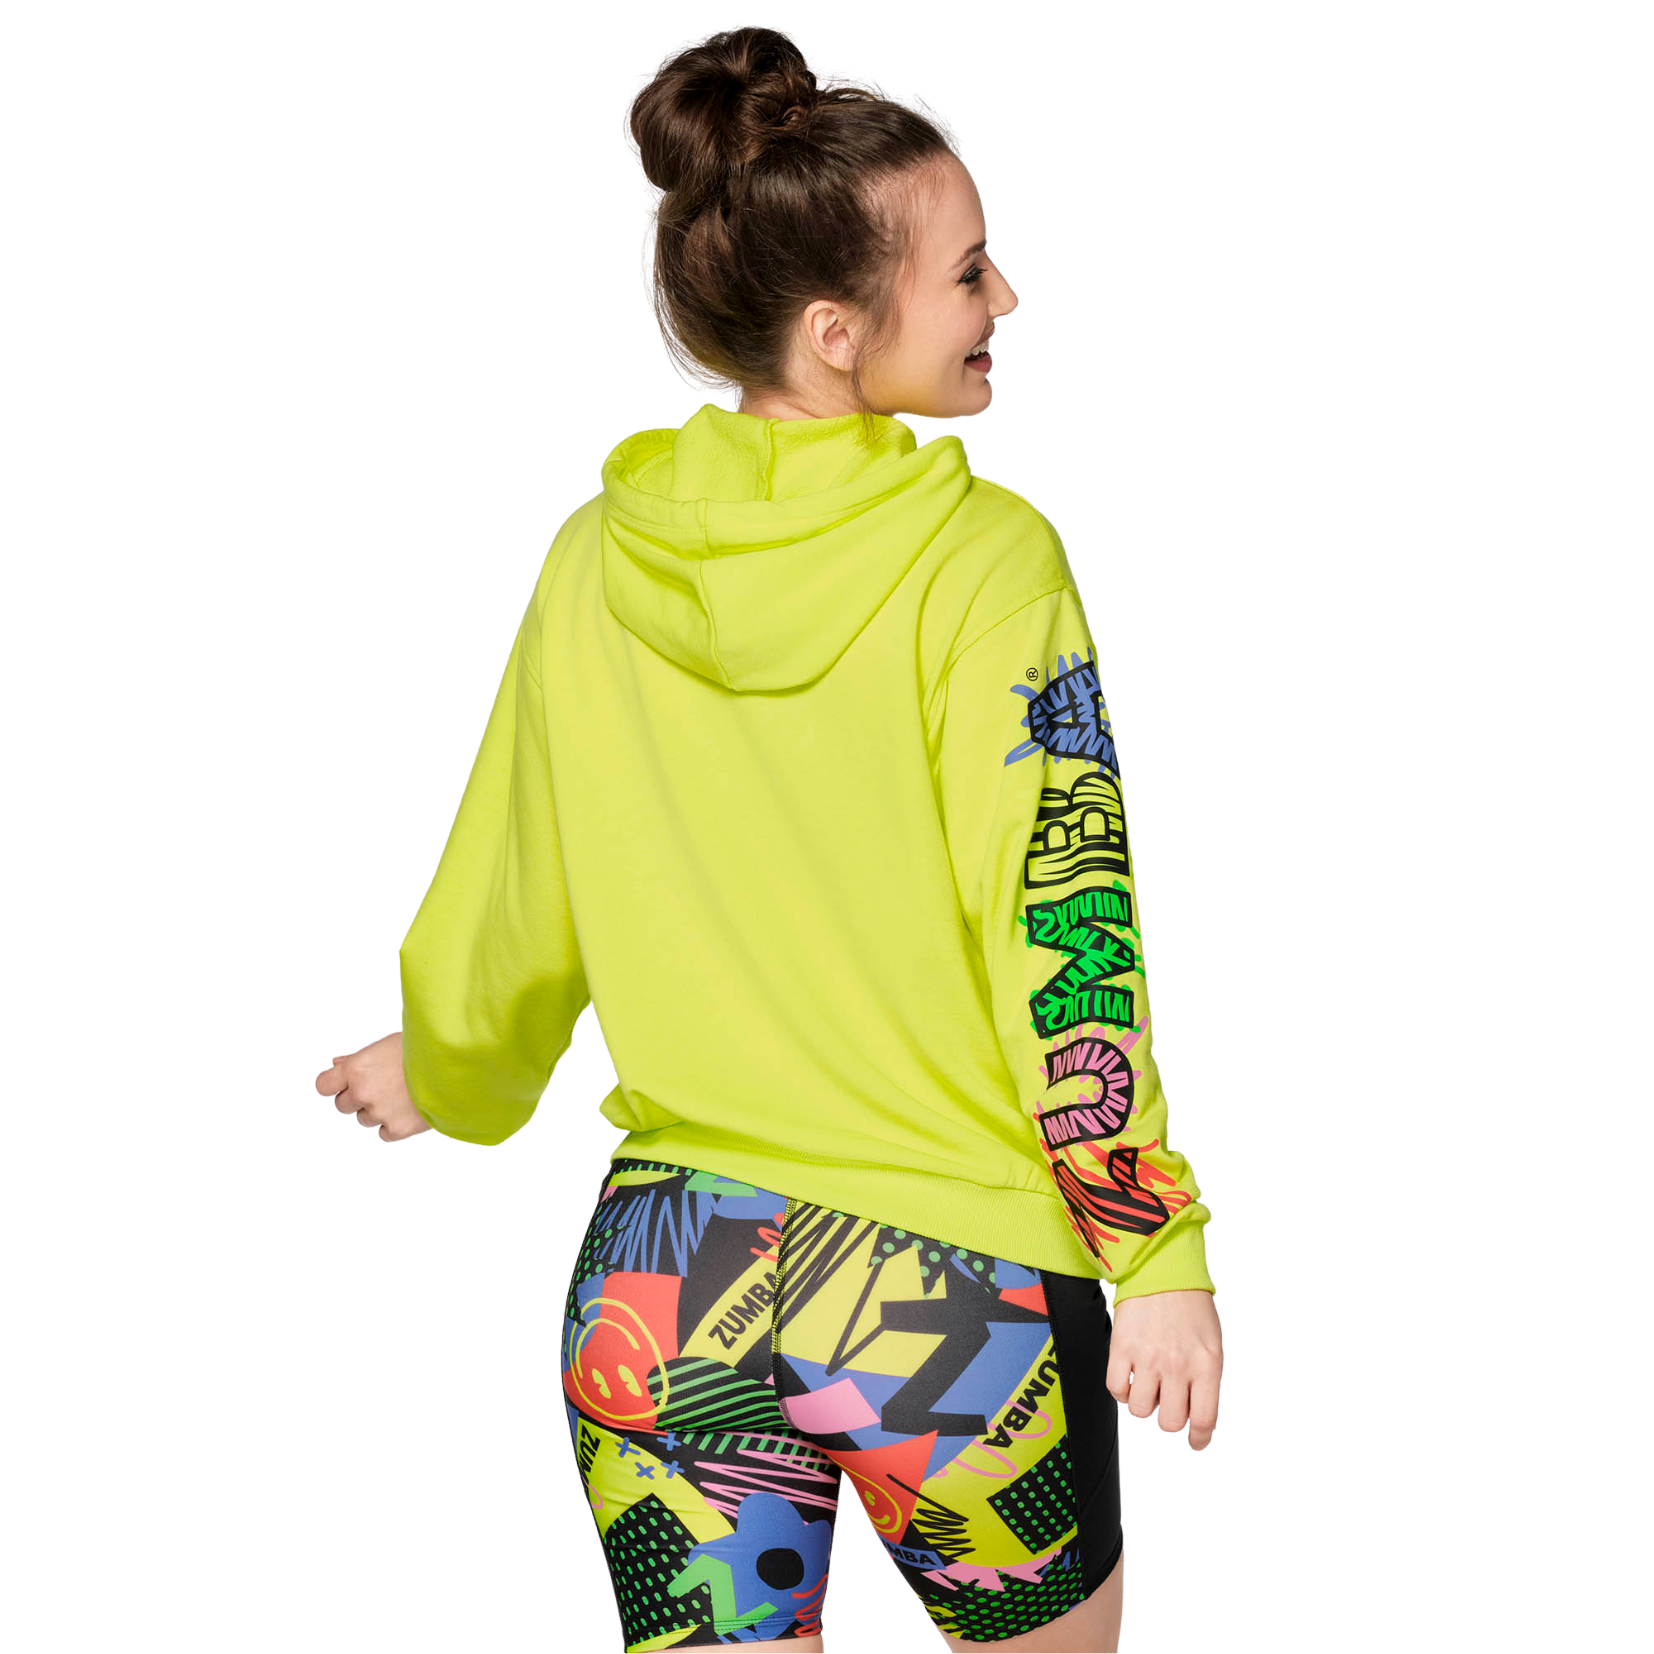 Zumba All Day Pullover Hoodie (Special Order)